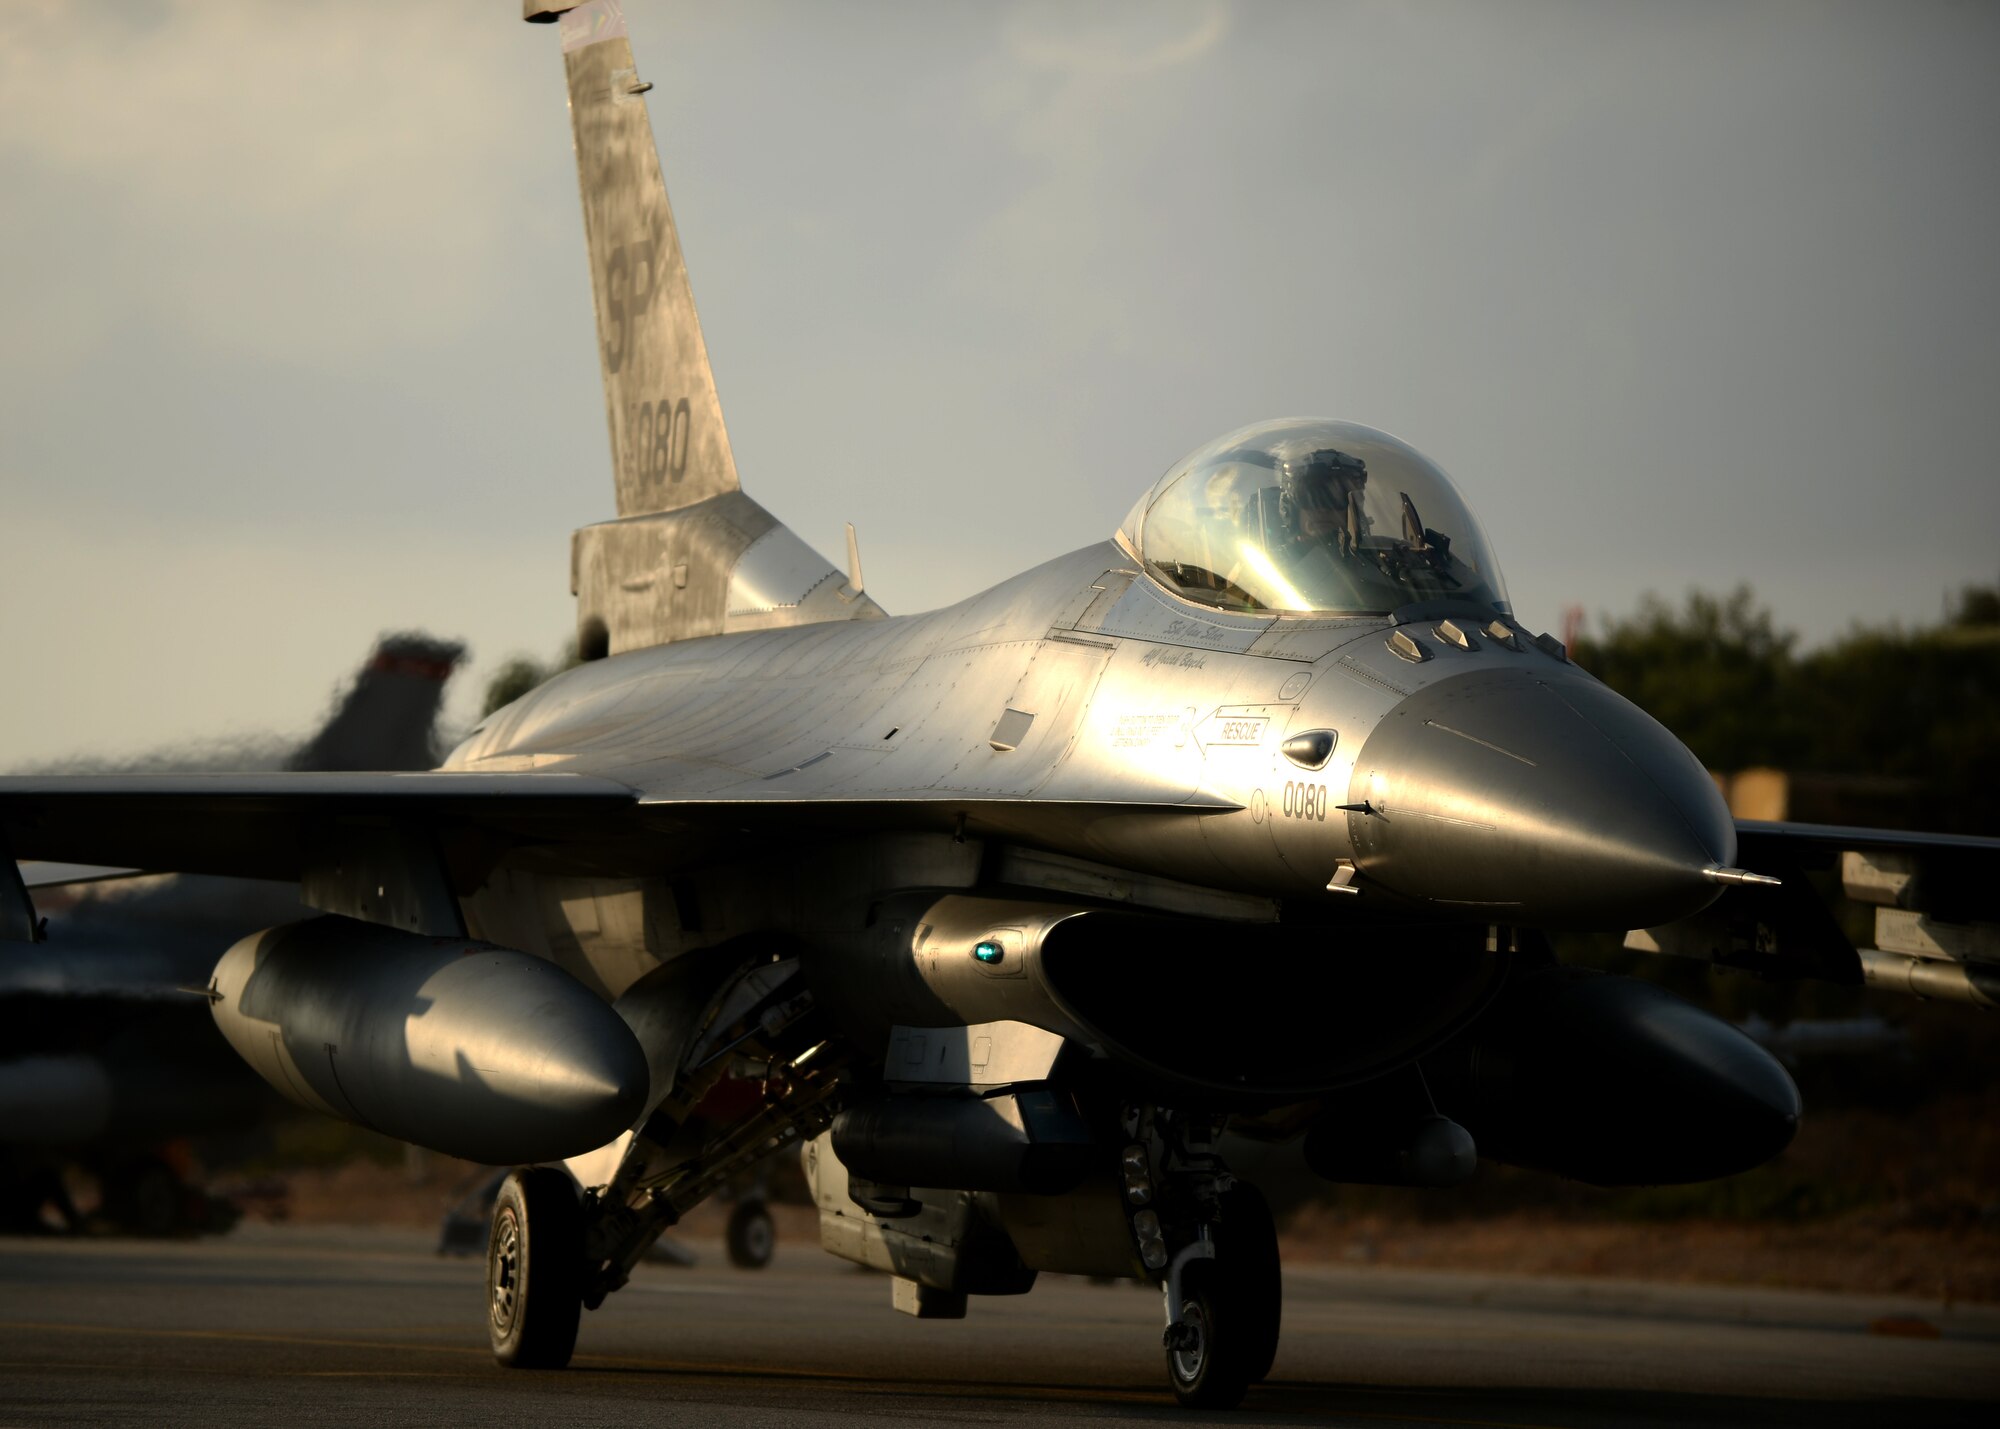 A U.S. Air Force F-16 Fighting Falcon fighter aircraft pilot taxis to the flightline Aug. 18, 2014, at Souda Bay, Greece, during a two-week training event between Greece and the U.S. The training allows the NATO partners to fly together during peacetime to strengthen their joint military capability. (U.S. Air Force photo by Staff Sgt. Daryl Knee/Released)